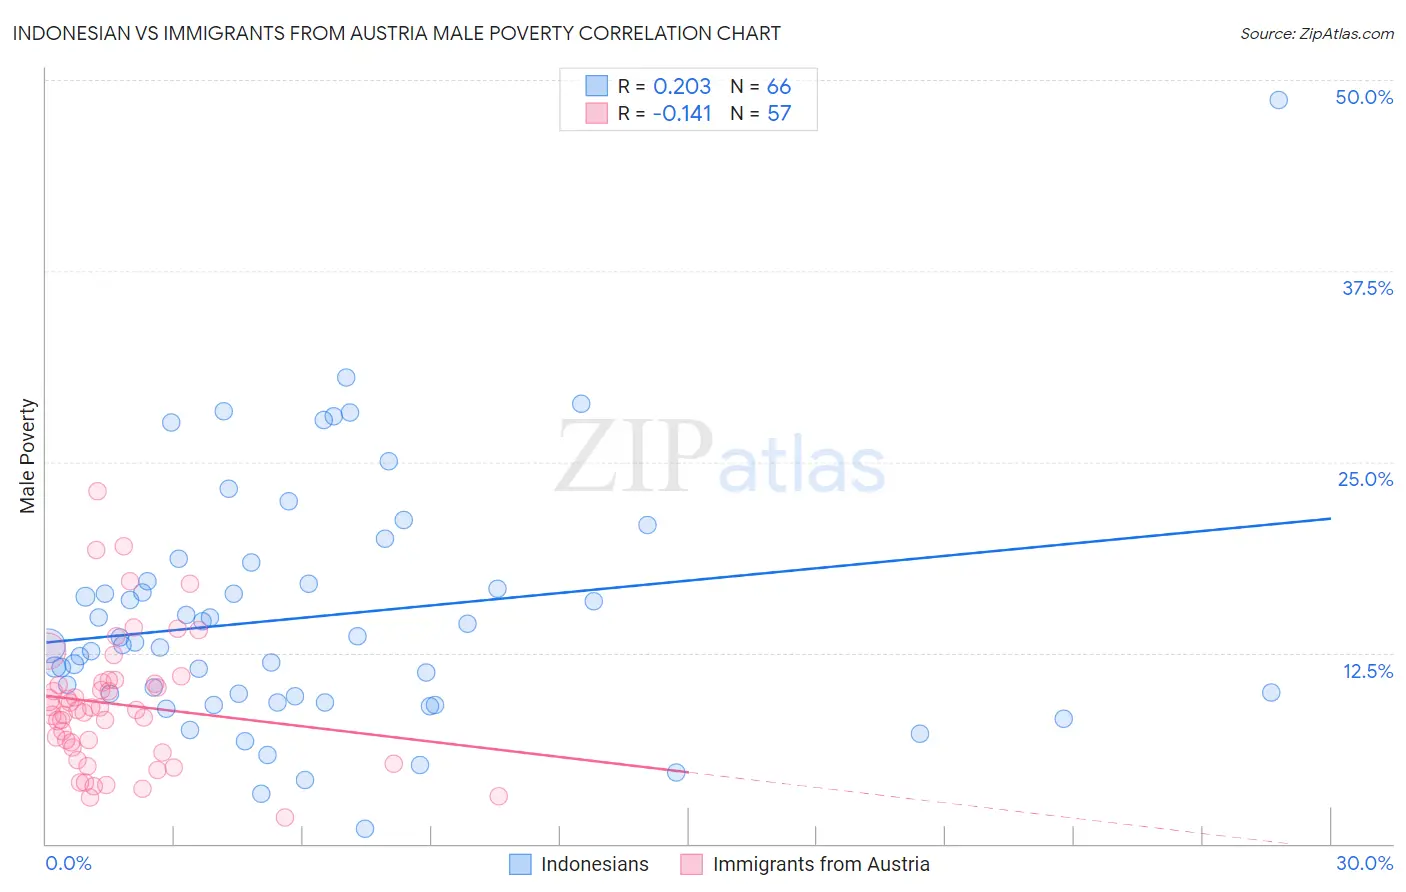 Indonesian vs Immigrants from Austria Male Poverty